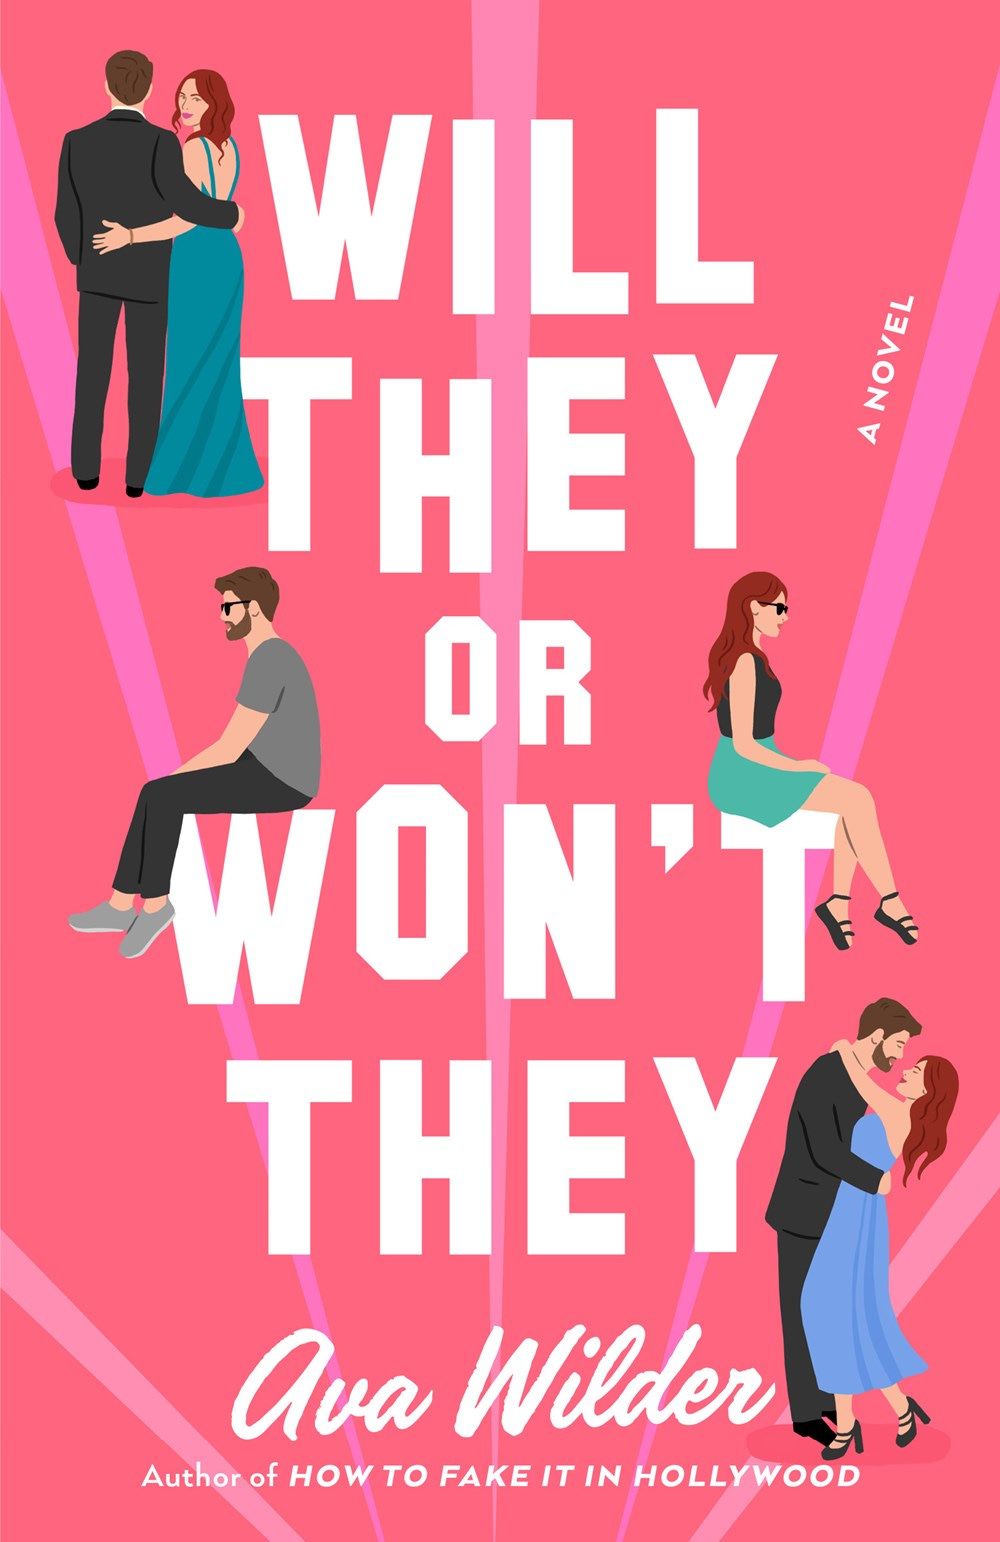 Ava Wilder's book, Will They Won't They. The same illustrated white man and woman three times. At the top, with their arms around each other and the woman looking over her shoulder. In the middle, sitting facing away from each other on opposite ends the word "won't". At the bottom, they are embracing.